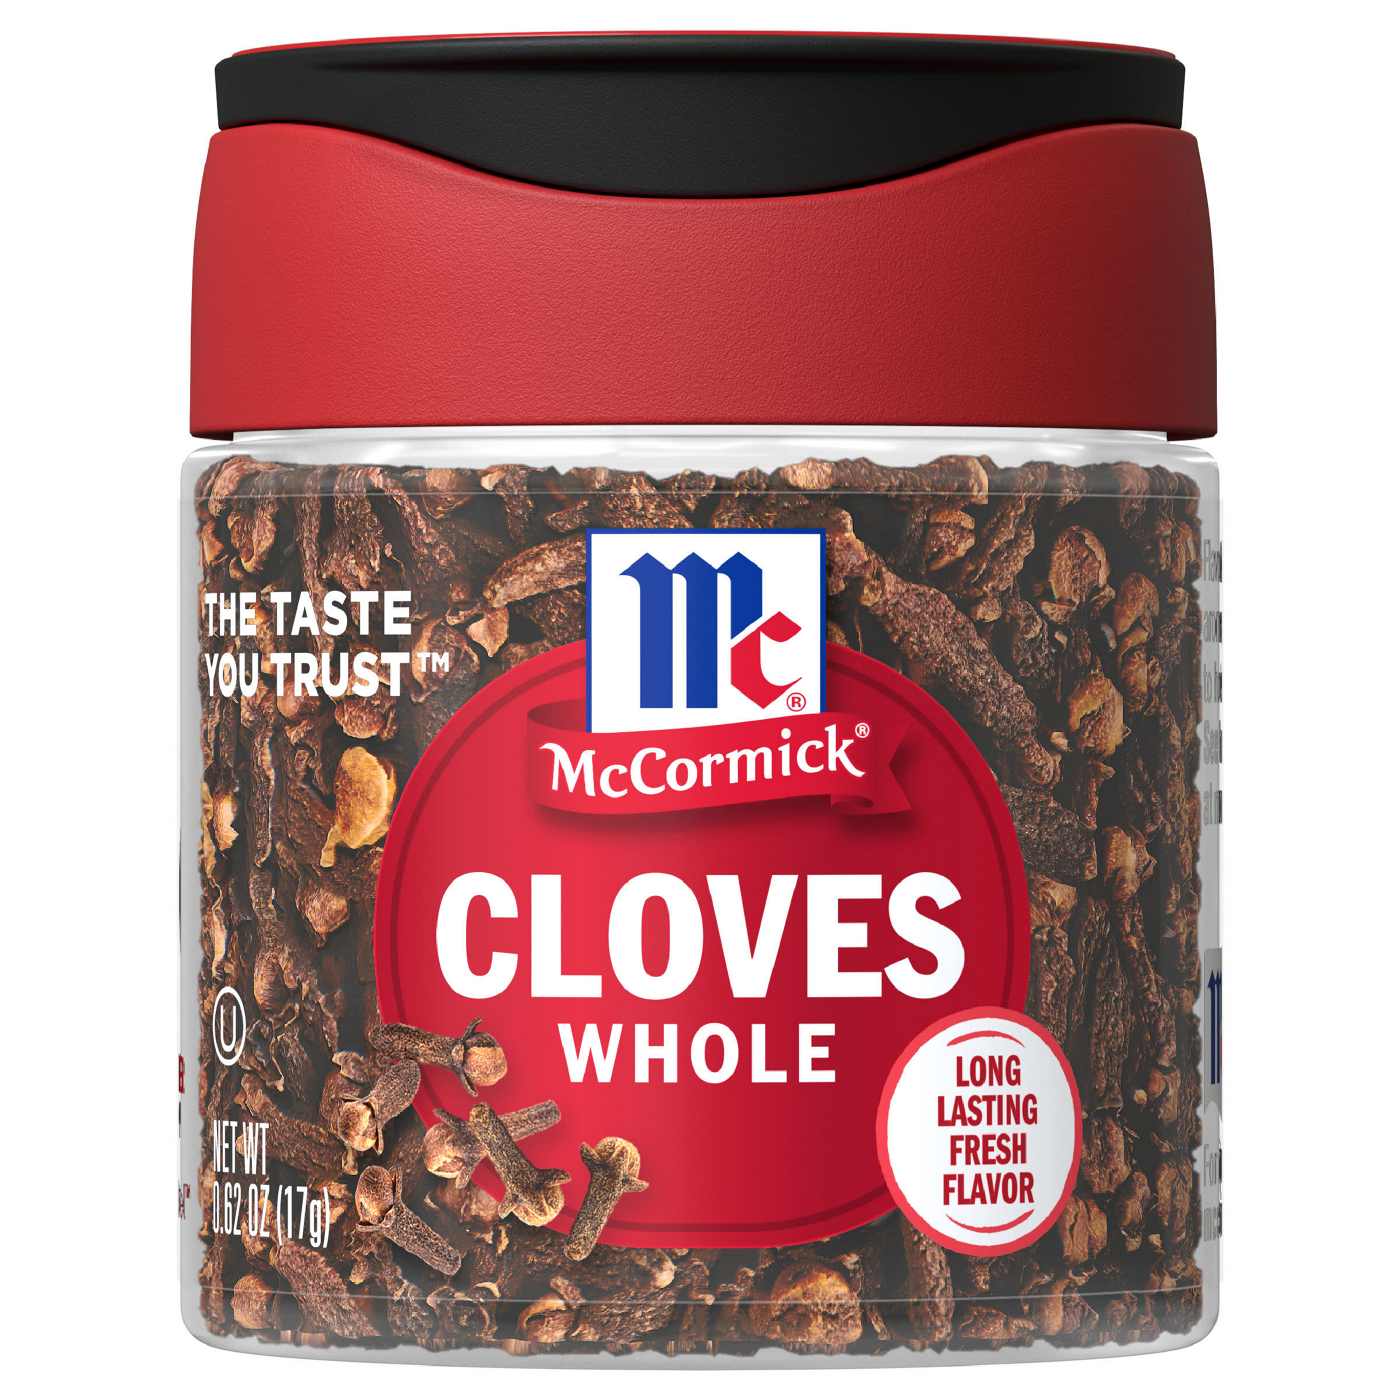 McCormick Whole Cloves; image 1 of 8